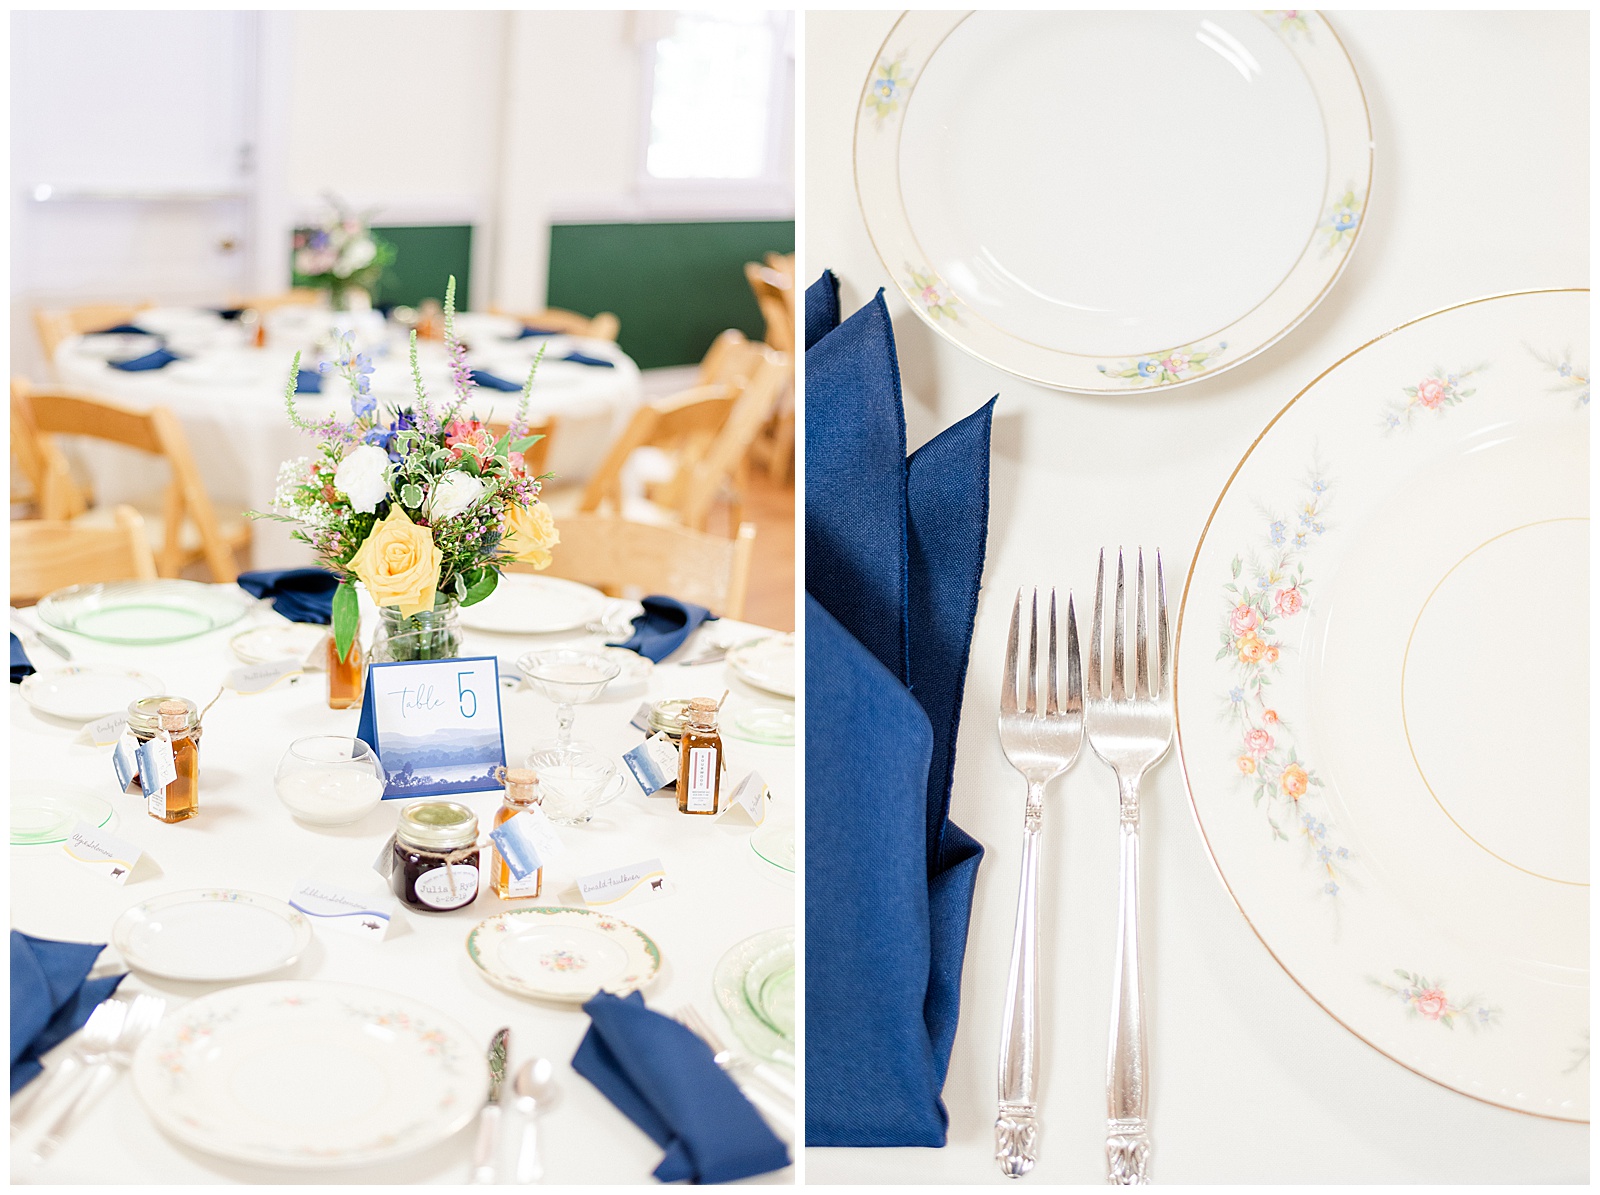 Blue Themed Table Setting and Fine China from Outdoorsy Summer Wedding at North Carolina Lakehouse in the Mountains | check out the full wedding at KevynDixonPhoto.com